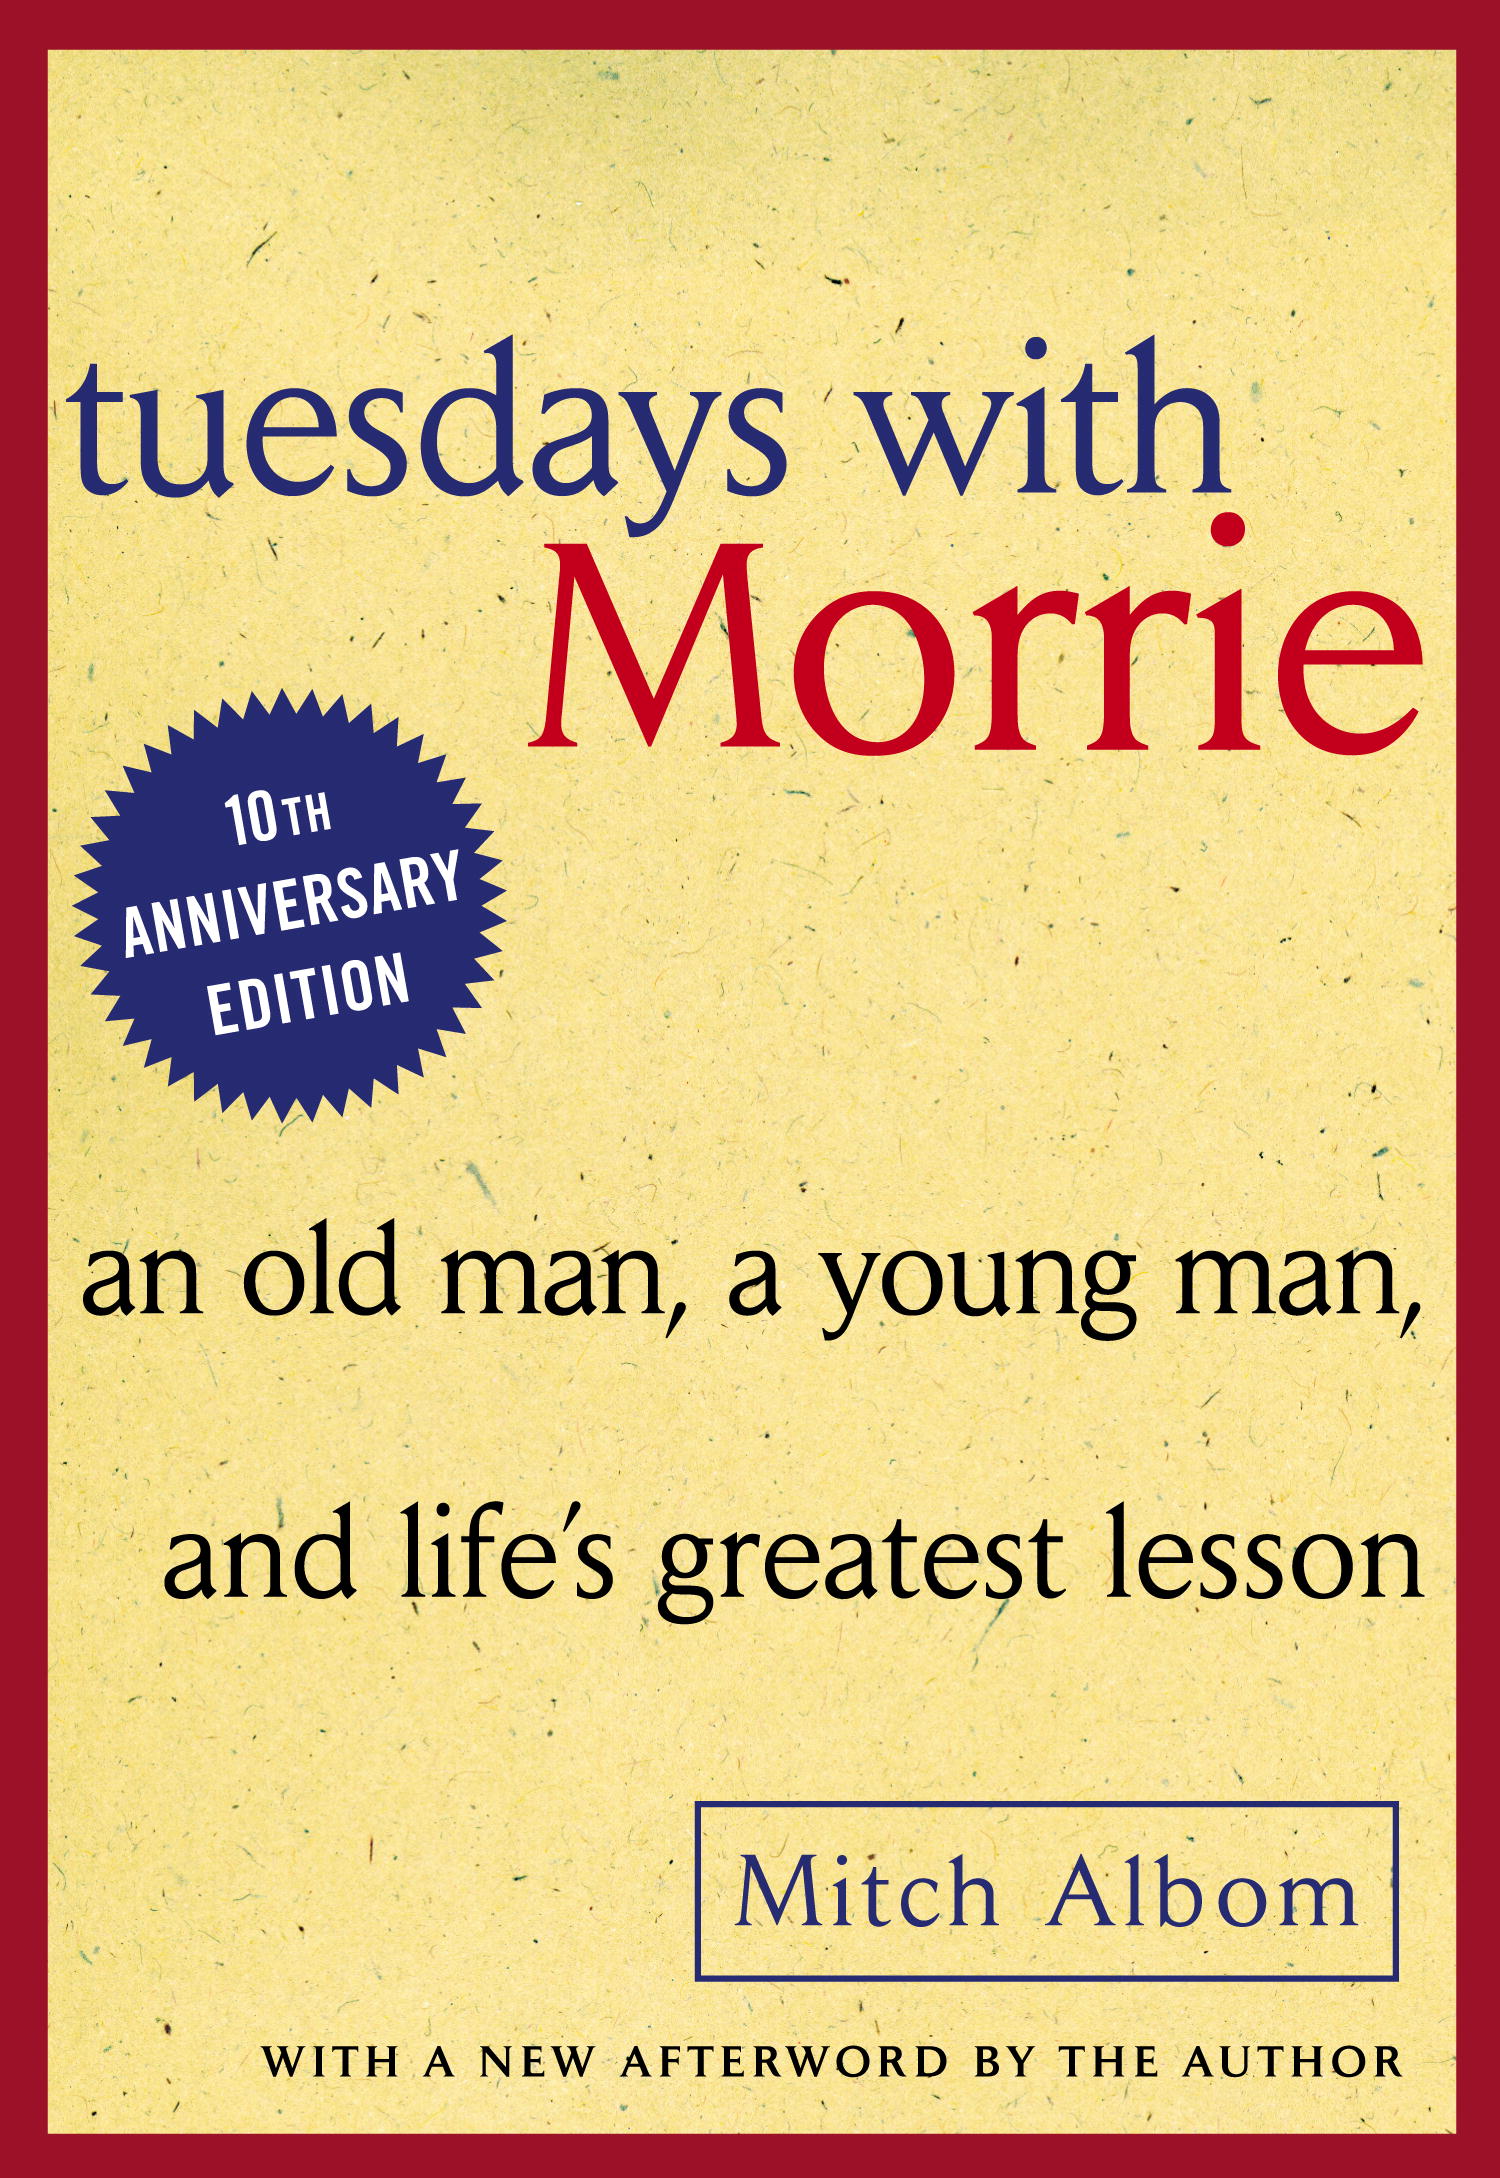 Good essay topics for tuesdays with morrie